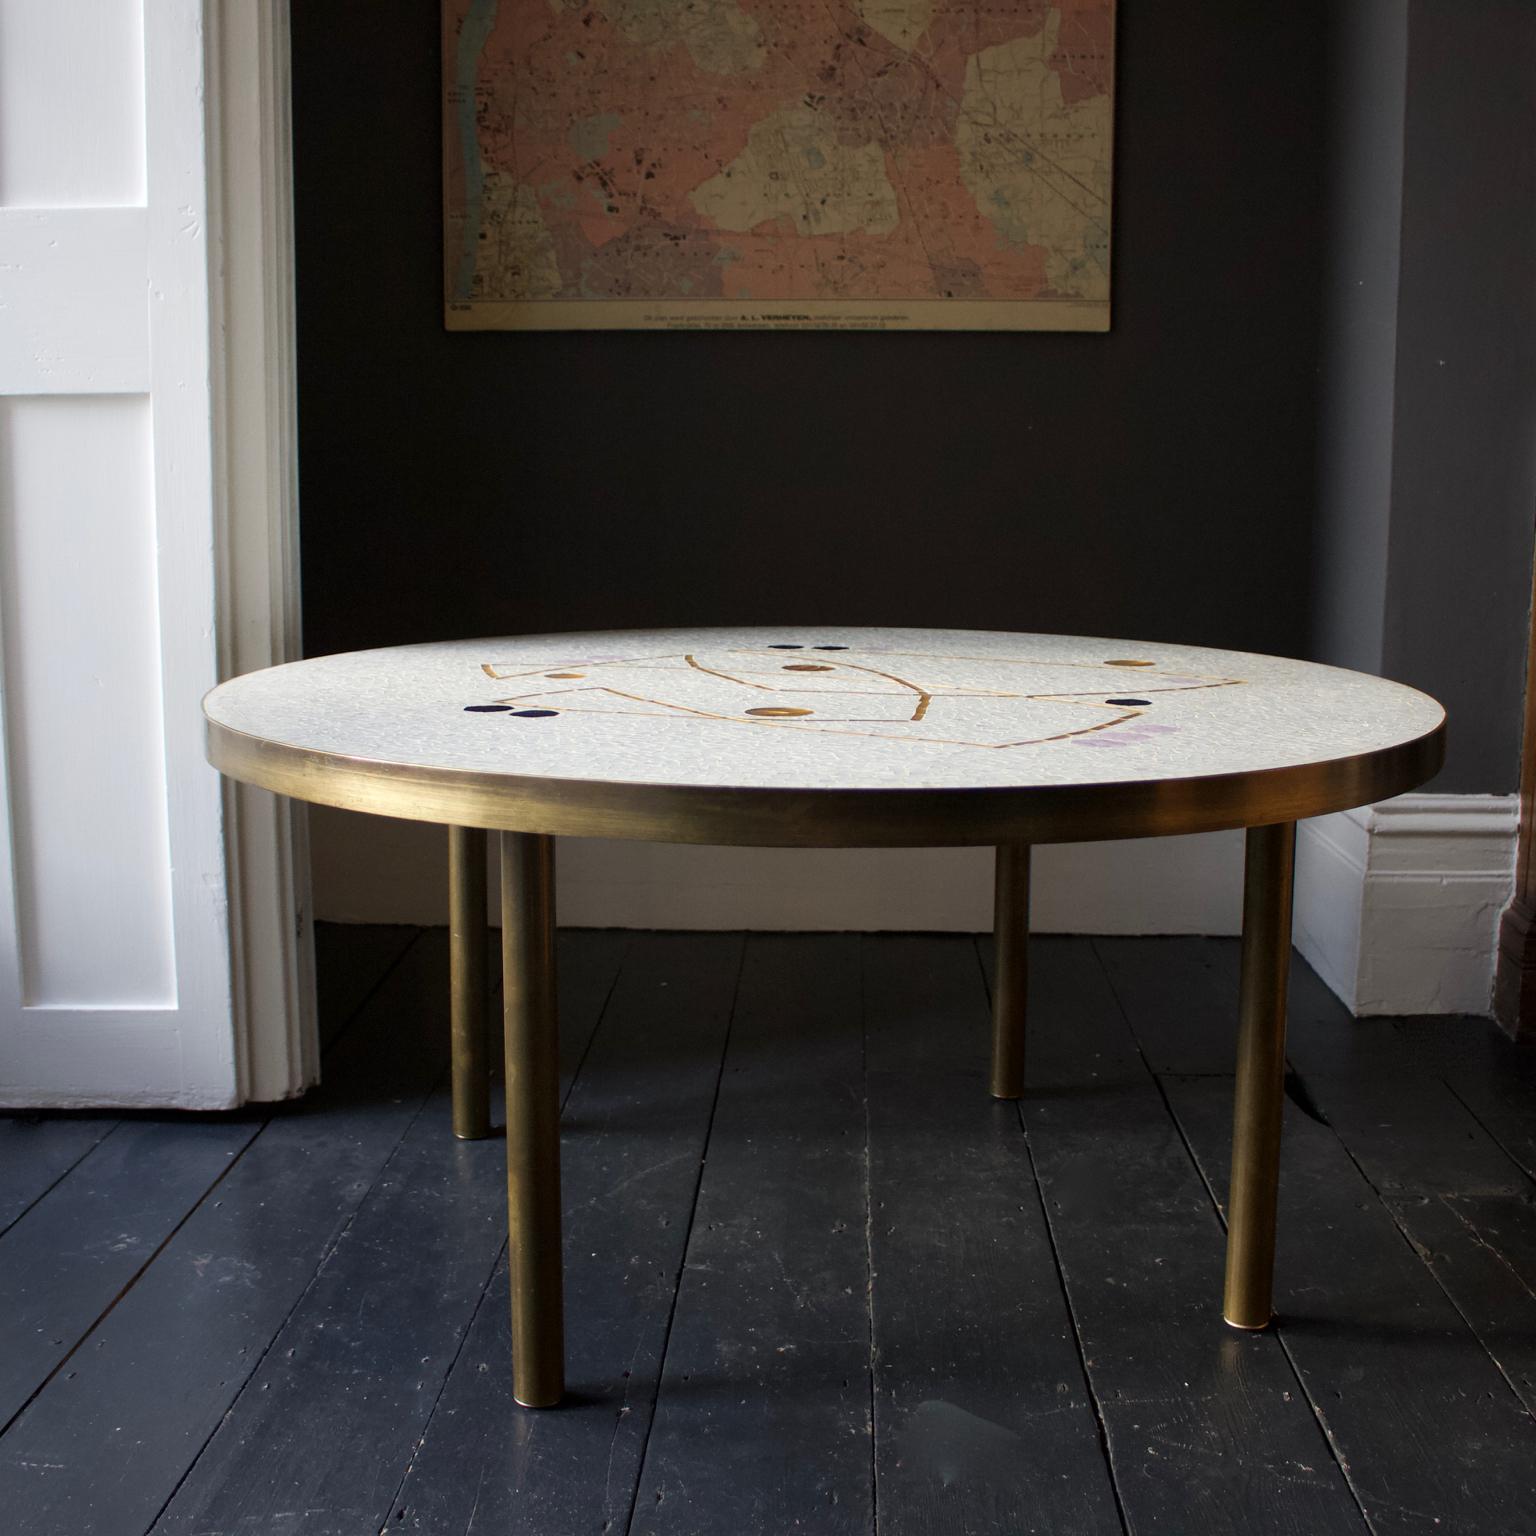 Mid-20th century modern pale grey mosaic table with gold and lilac accents and brass surround.

The tabletop is covered in pale grey mosaic with a beautiful abstract pattern of gold lines and circles, with black and lilac accents. The mosaic is